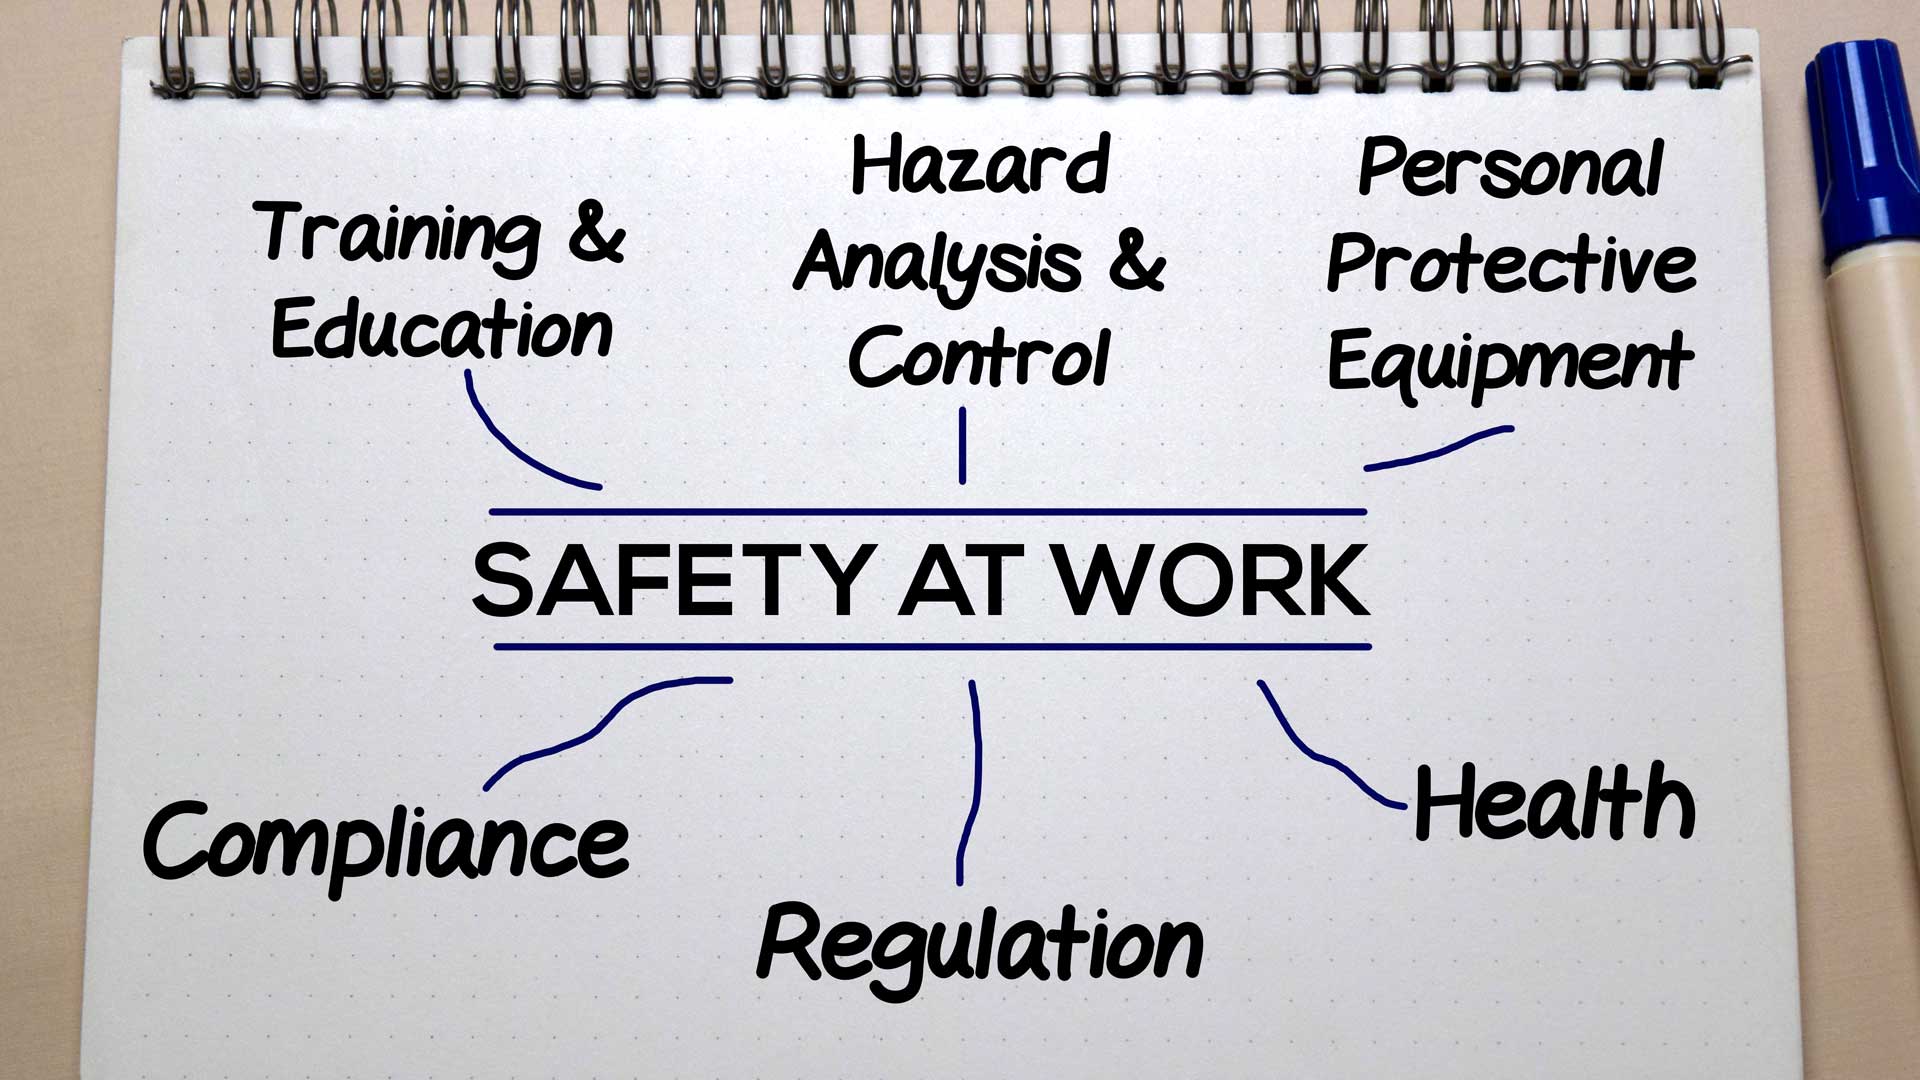 We often hear about the challenges that trainers face in their day-to-day activities to try and maintain a safe and productive workplace.